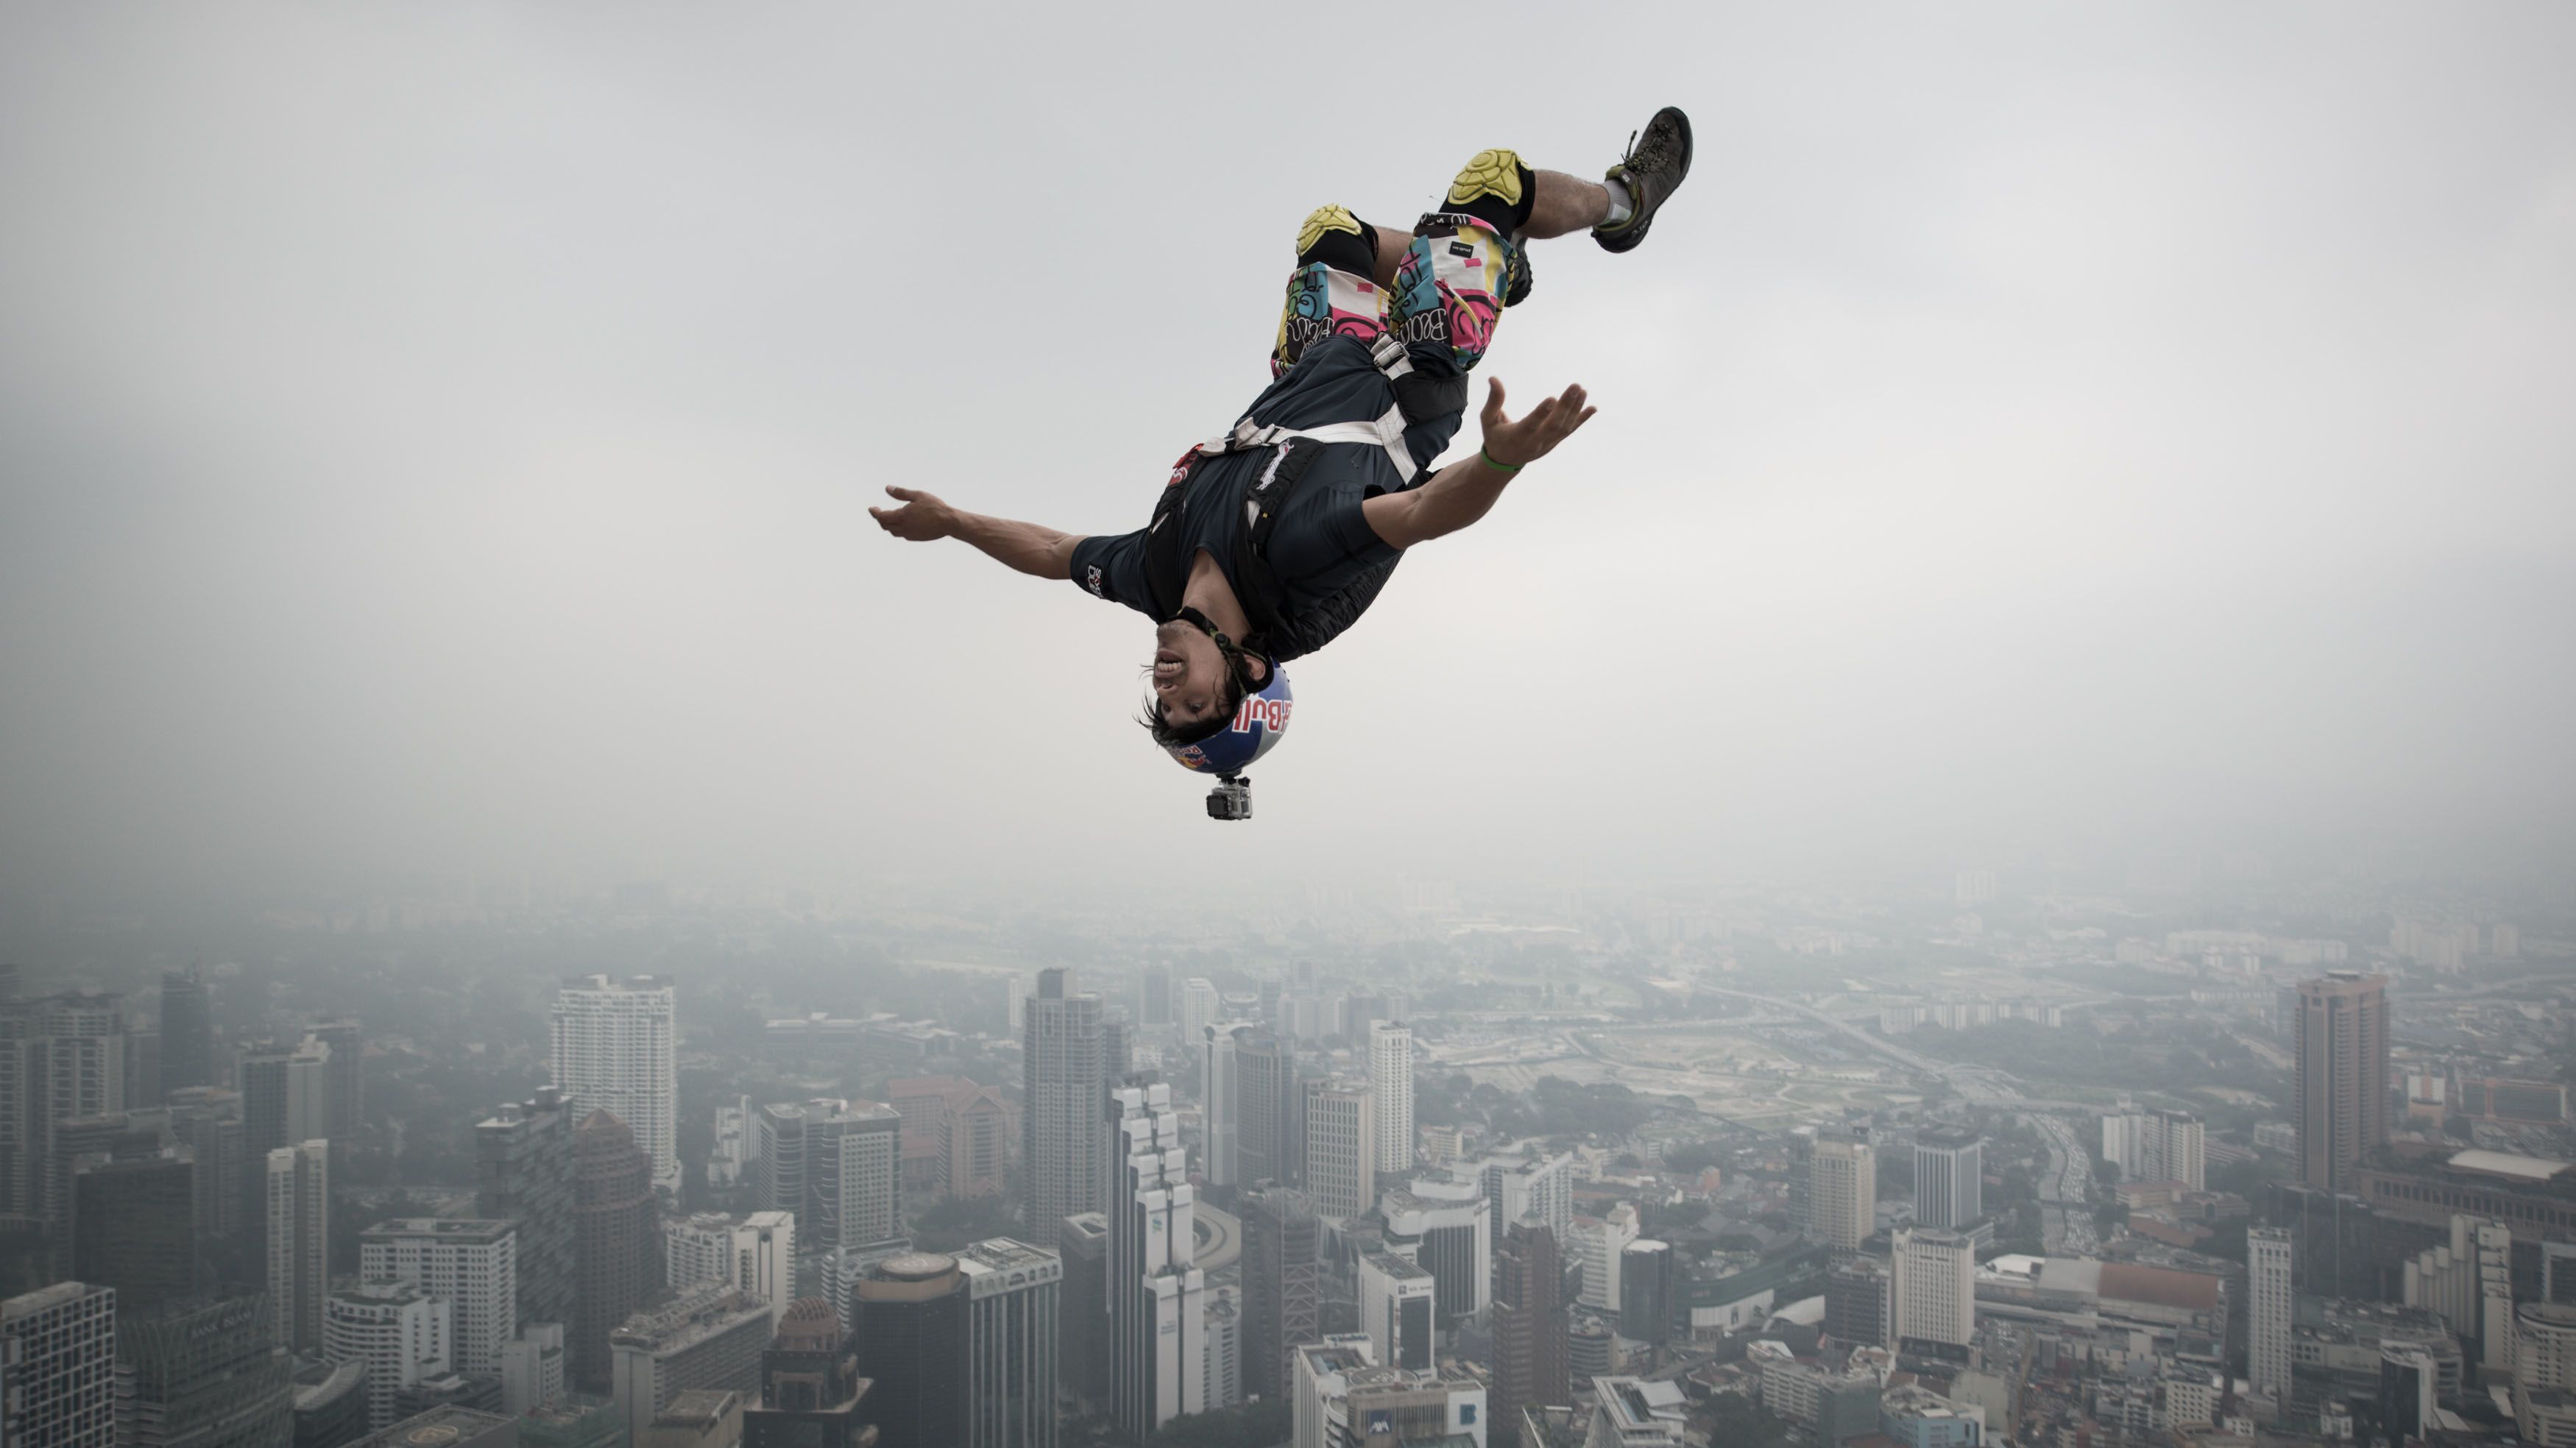 About LEAP  The community for extreme sports - Entertainment